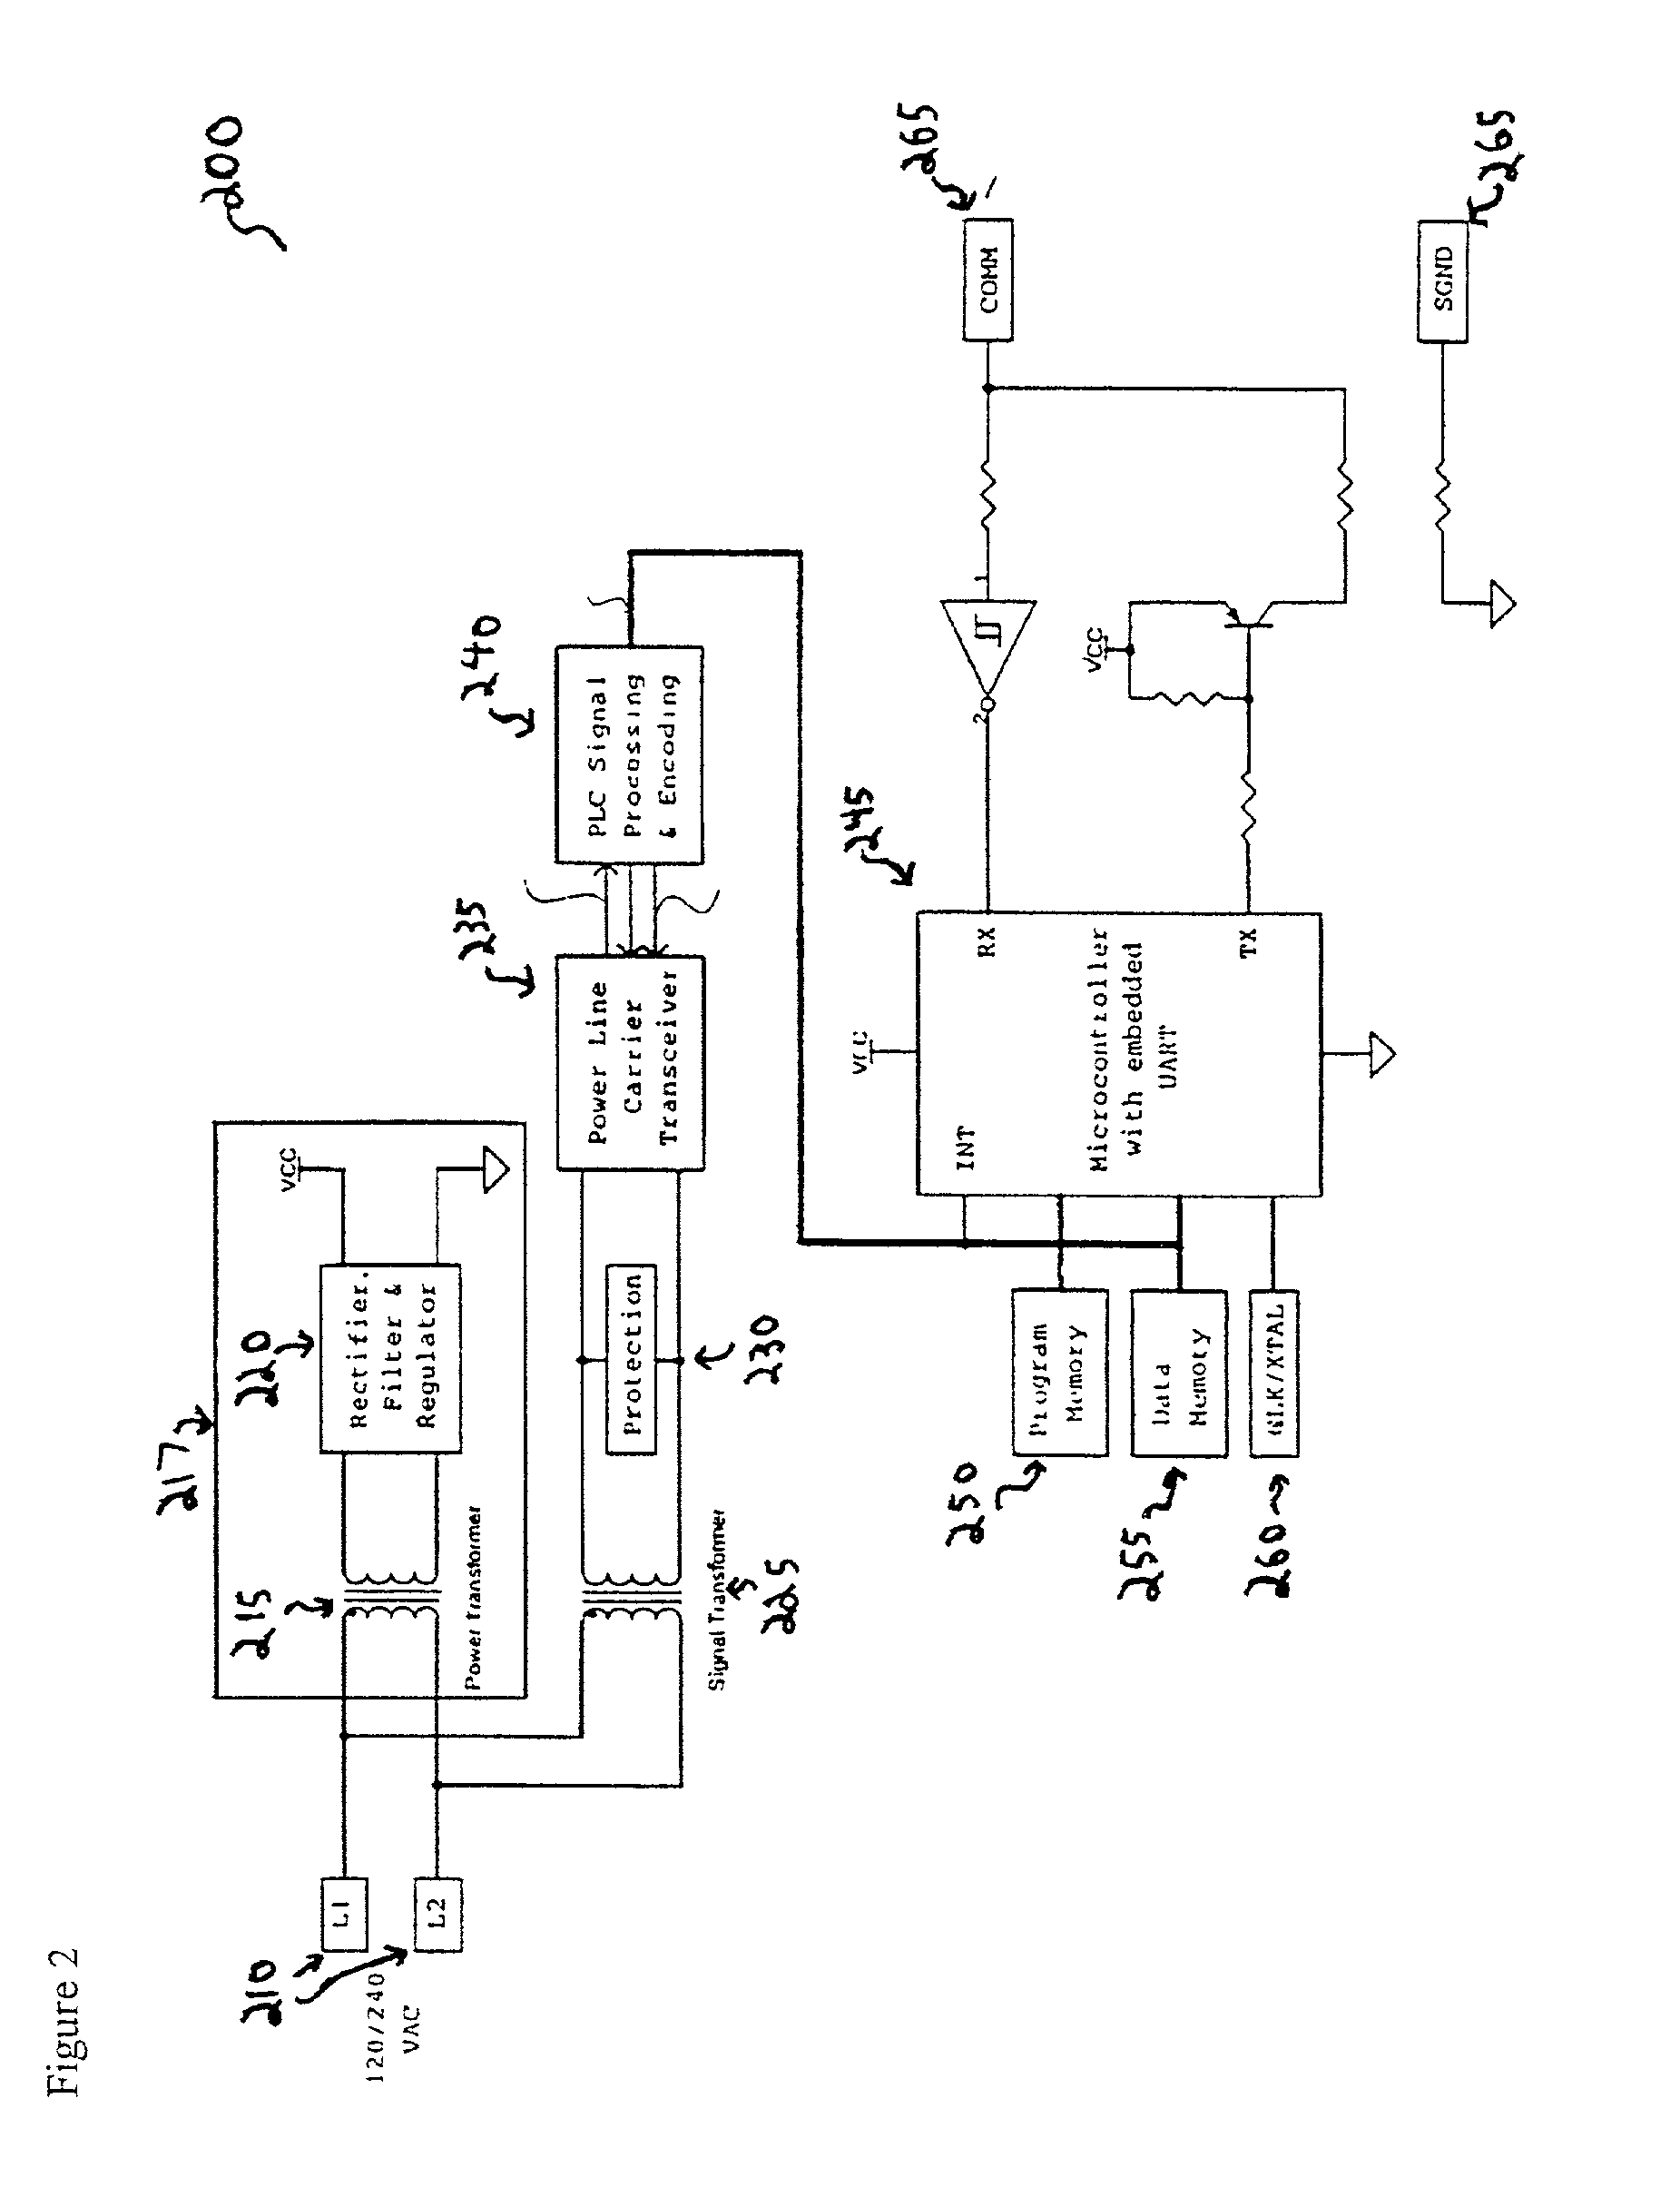 Method and apparatus for interfacing a power line carrier and an appliance